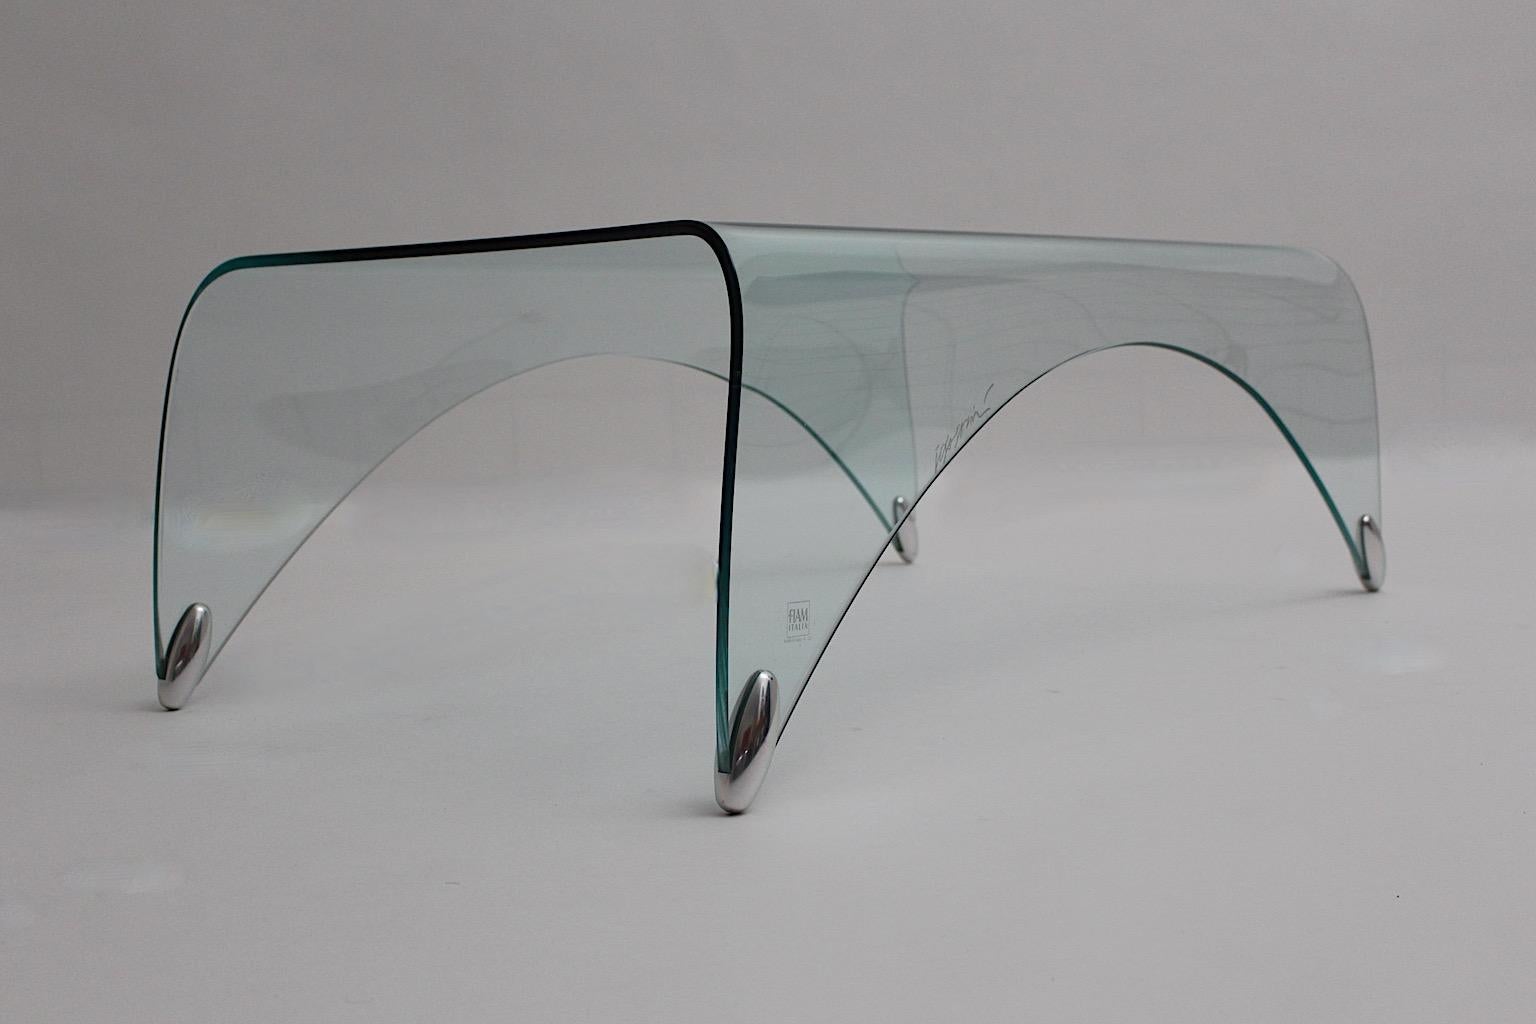 Modern Vintage organic waterfall sofa table or coffee table model Genio from clear security glass with metal details by Massimo Iosa Ghini for FIAM Italy, end of 20th century.
This wonderful sofa table shows slightly rounded shape from clear